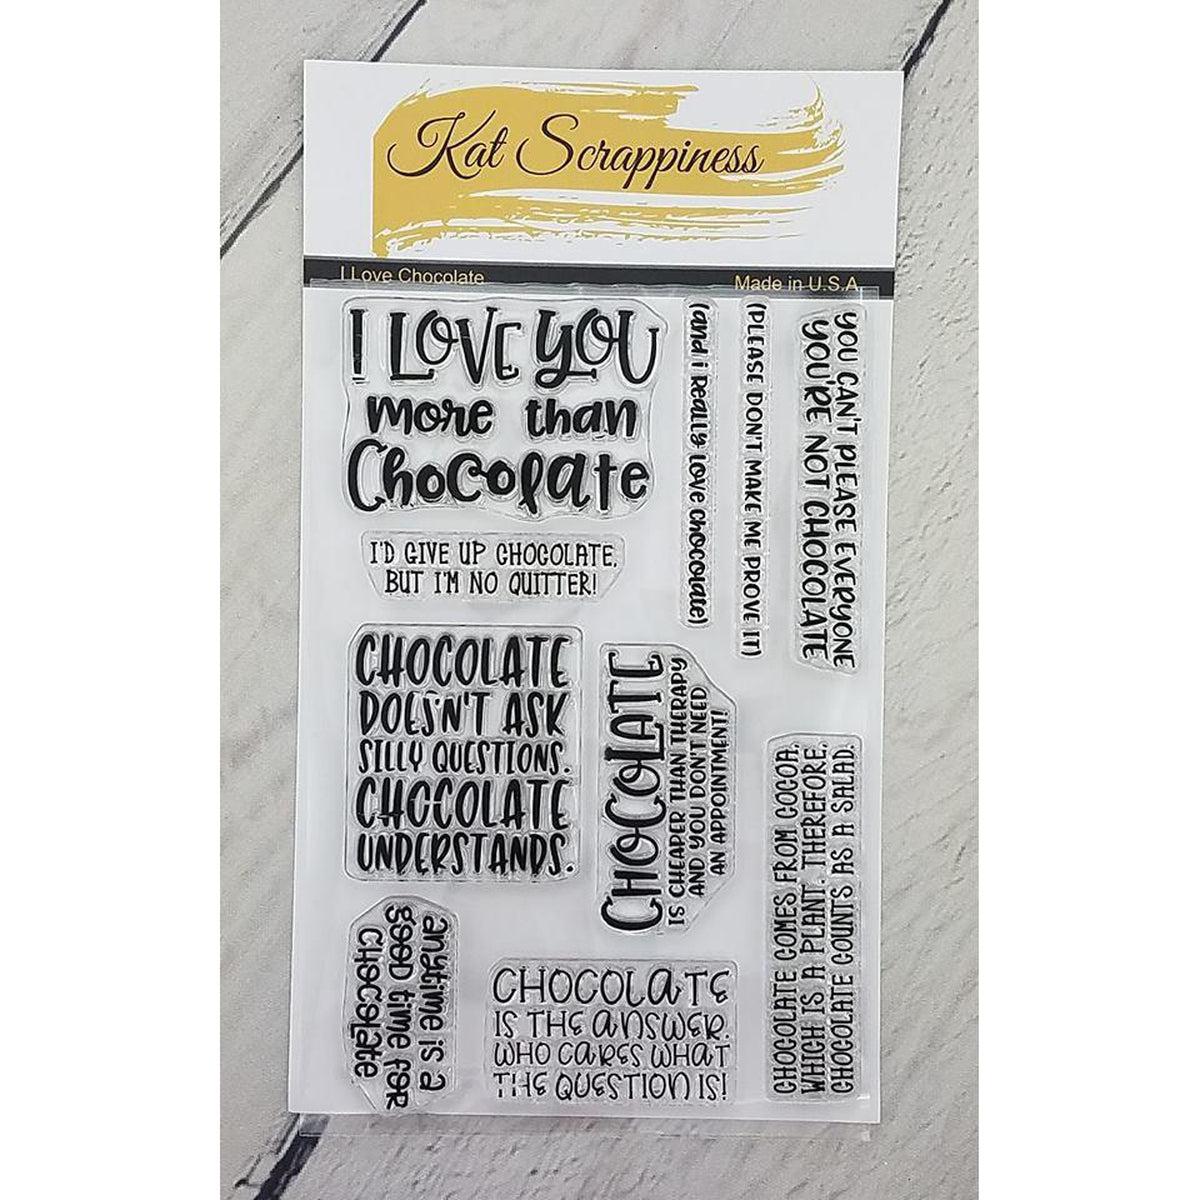 I Love Chocolate Sentiment Stamp Set by Kat Scrappiness - Kat Scrappiness